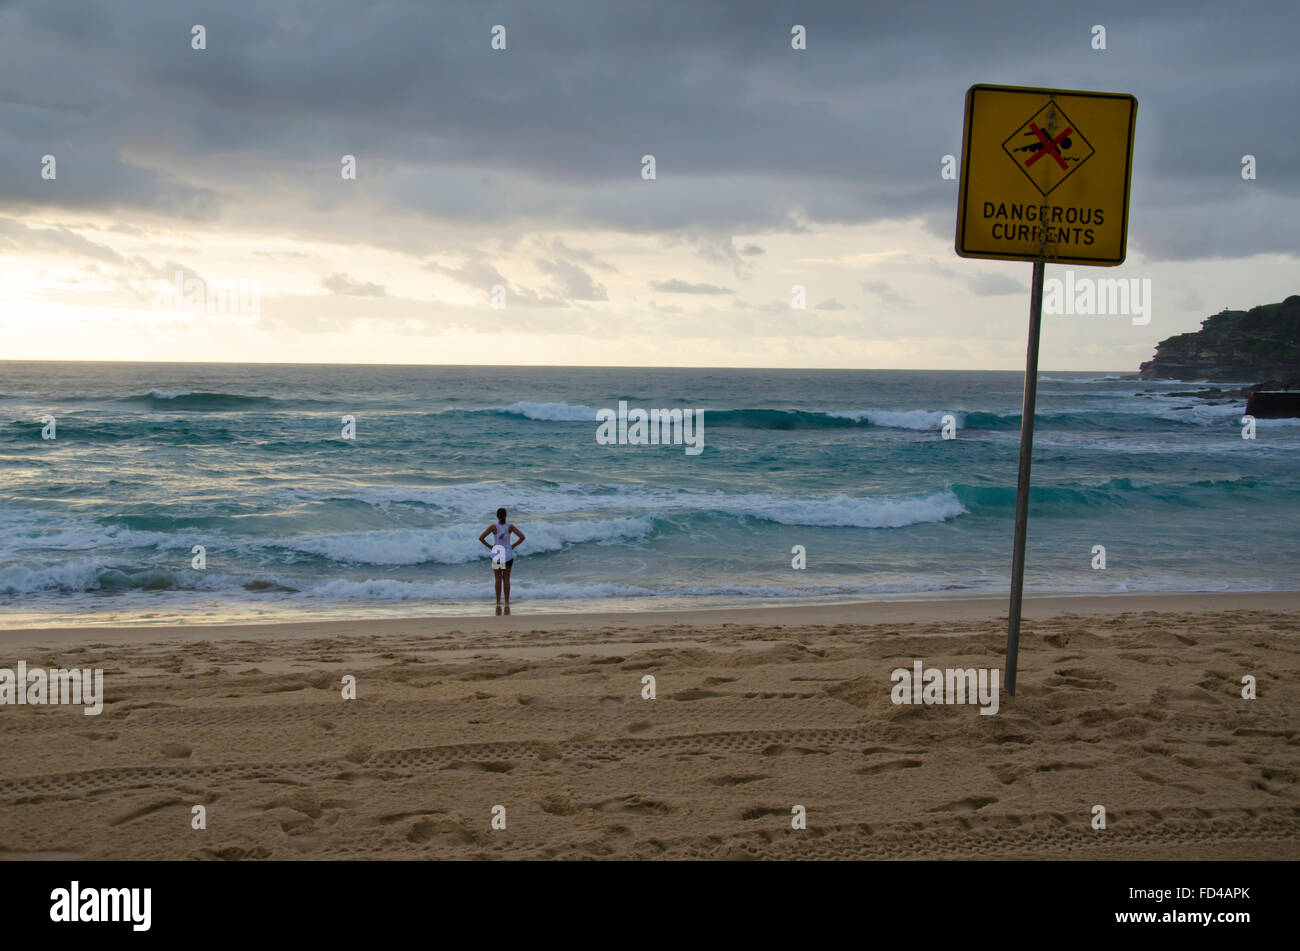 A dangerous surf, warning sign and a person watching the waves and ocean on Bondi Beach in Sydney, Australia Stock Photo